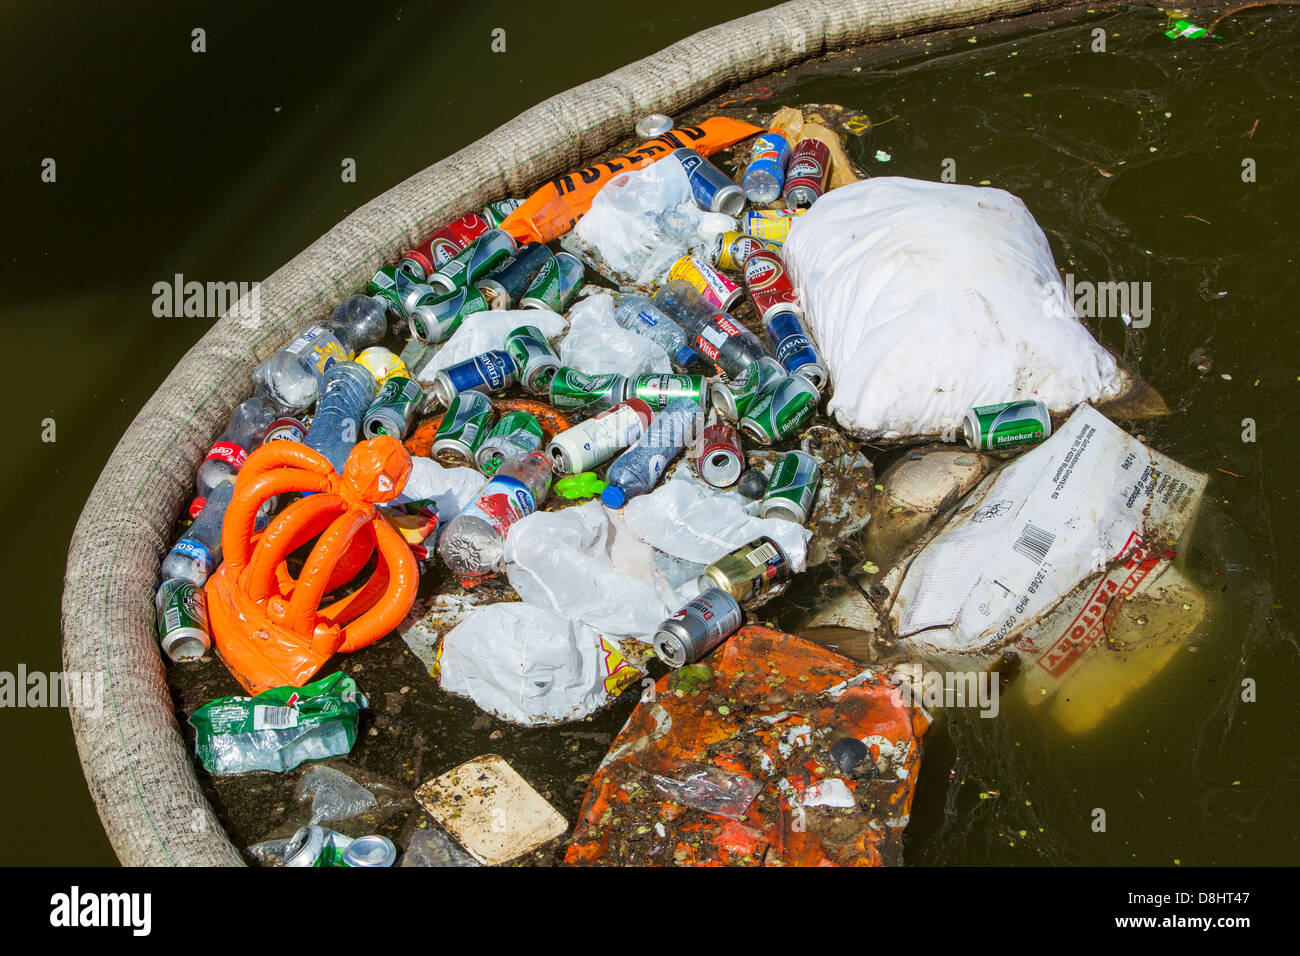 Rubbish up against a litter trap on a canal in Amsterdam, Netherlands. Stock Photo